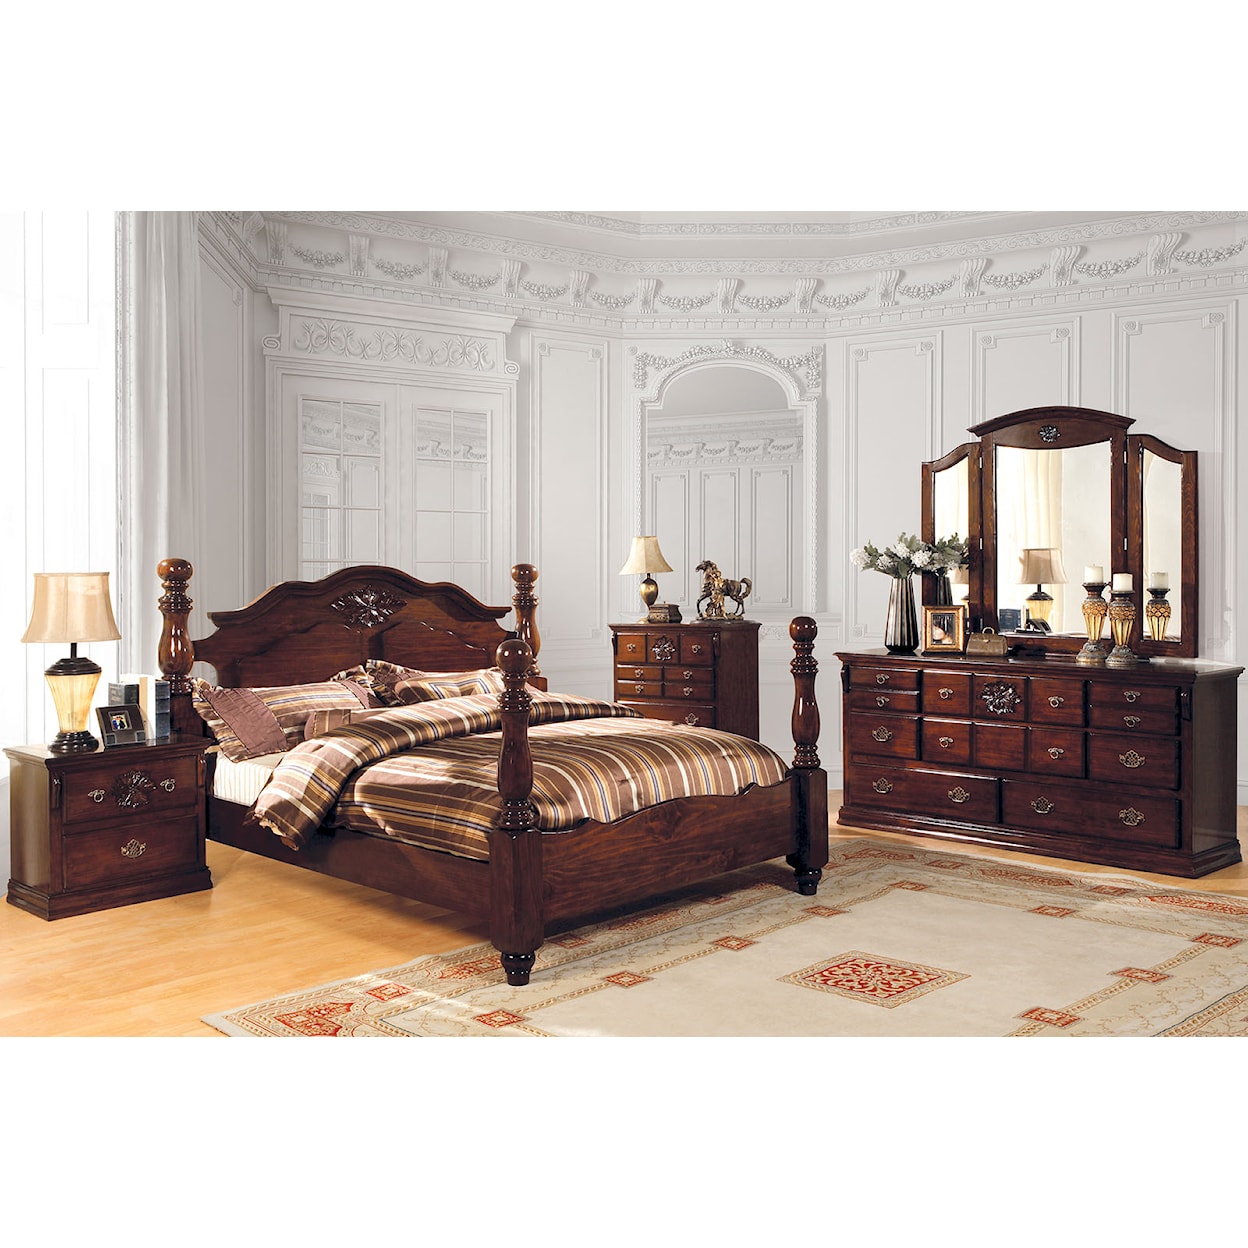 Furniture of America Tuscan Queen Bedroom Group 